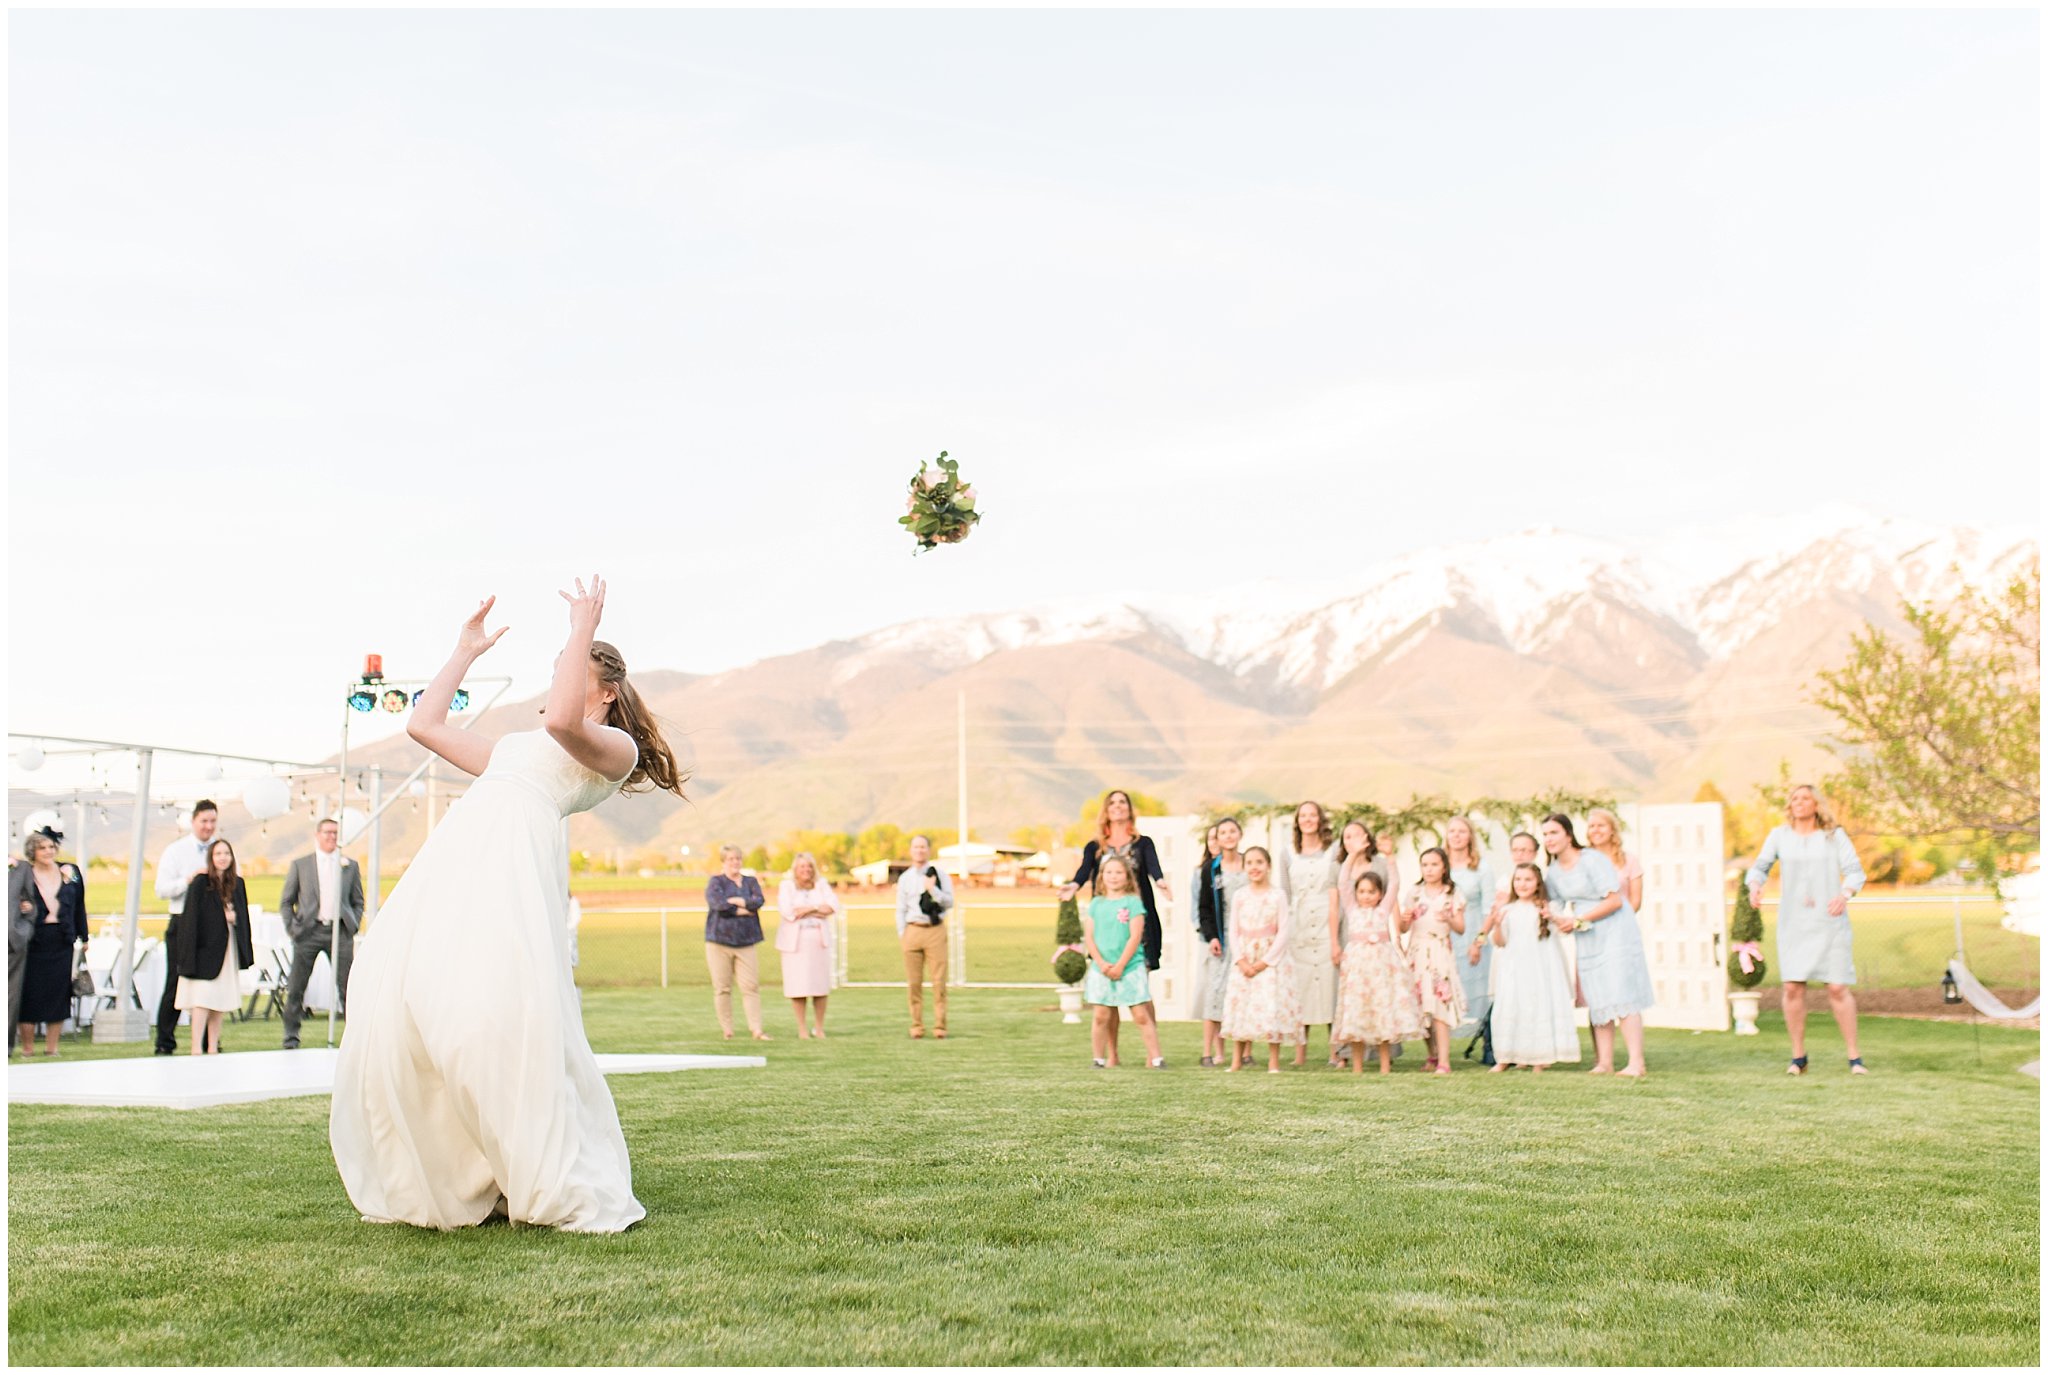 Bouquet toss outdoors | Backyard outdoor spring wedding with grey, blush, and light blue wedding colors | Spring Provo City Center Temple Wedding | Utah Wedding Photographers | Jessie and Dallin Photography